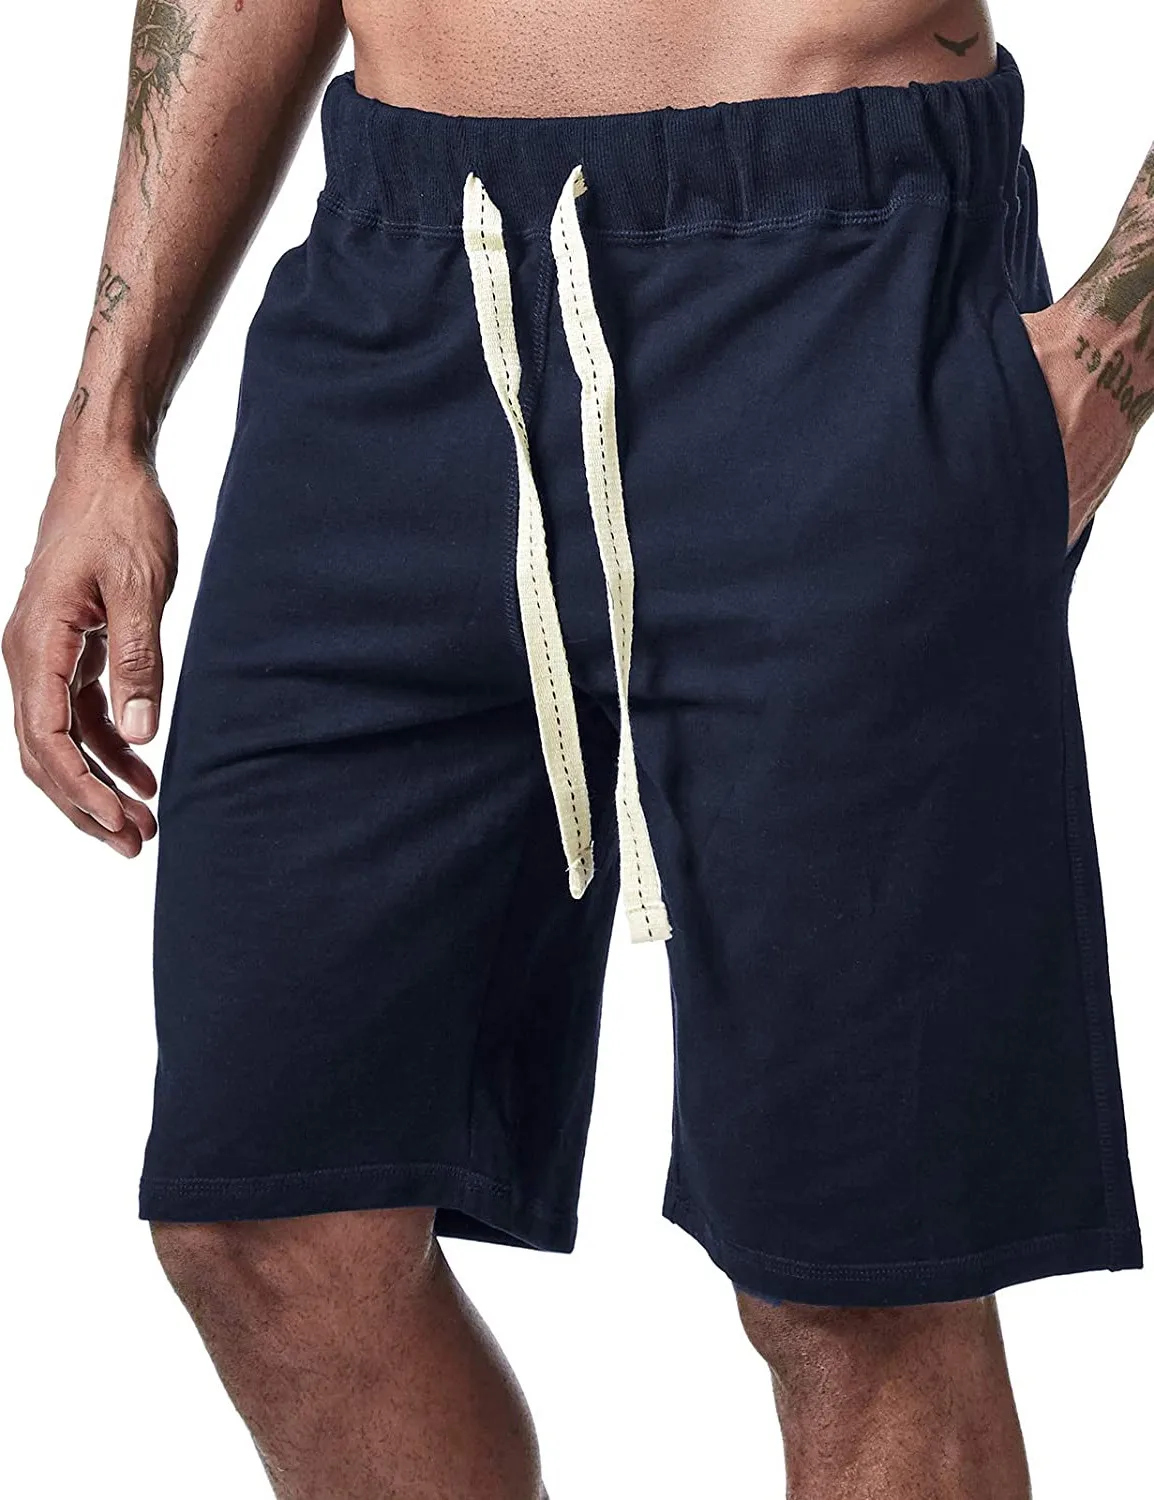 Newest Fashion Summer Cotton Men'sSweatpants Shorts Man High Quality Breathable Quick Dry Sportswear Jogger Casual Beach Shorts smart casual shorts